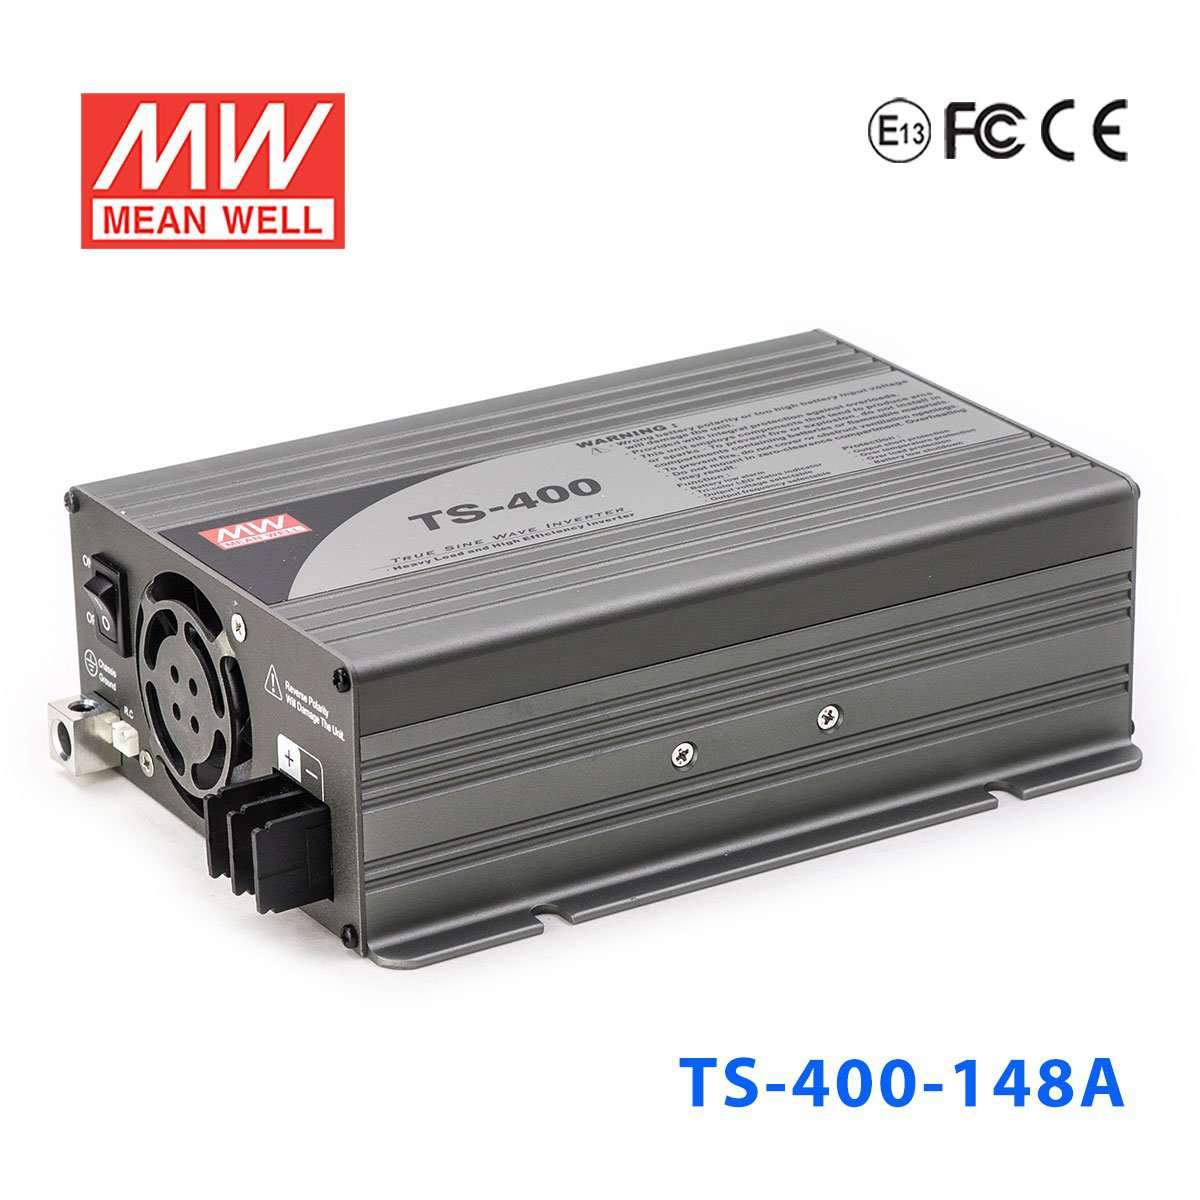 Mean Well TS-400-148A True Sine Wave 400W 110V 10A - DC-AC Power Inverter